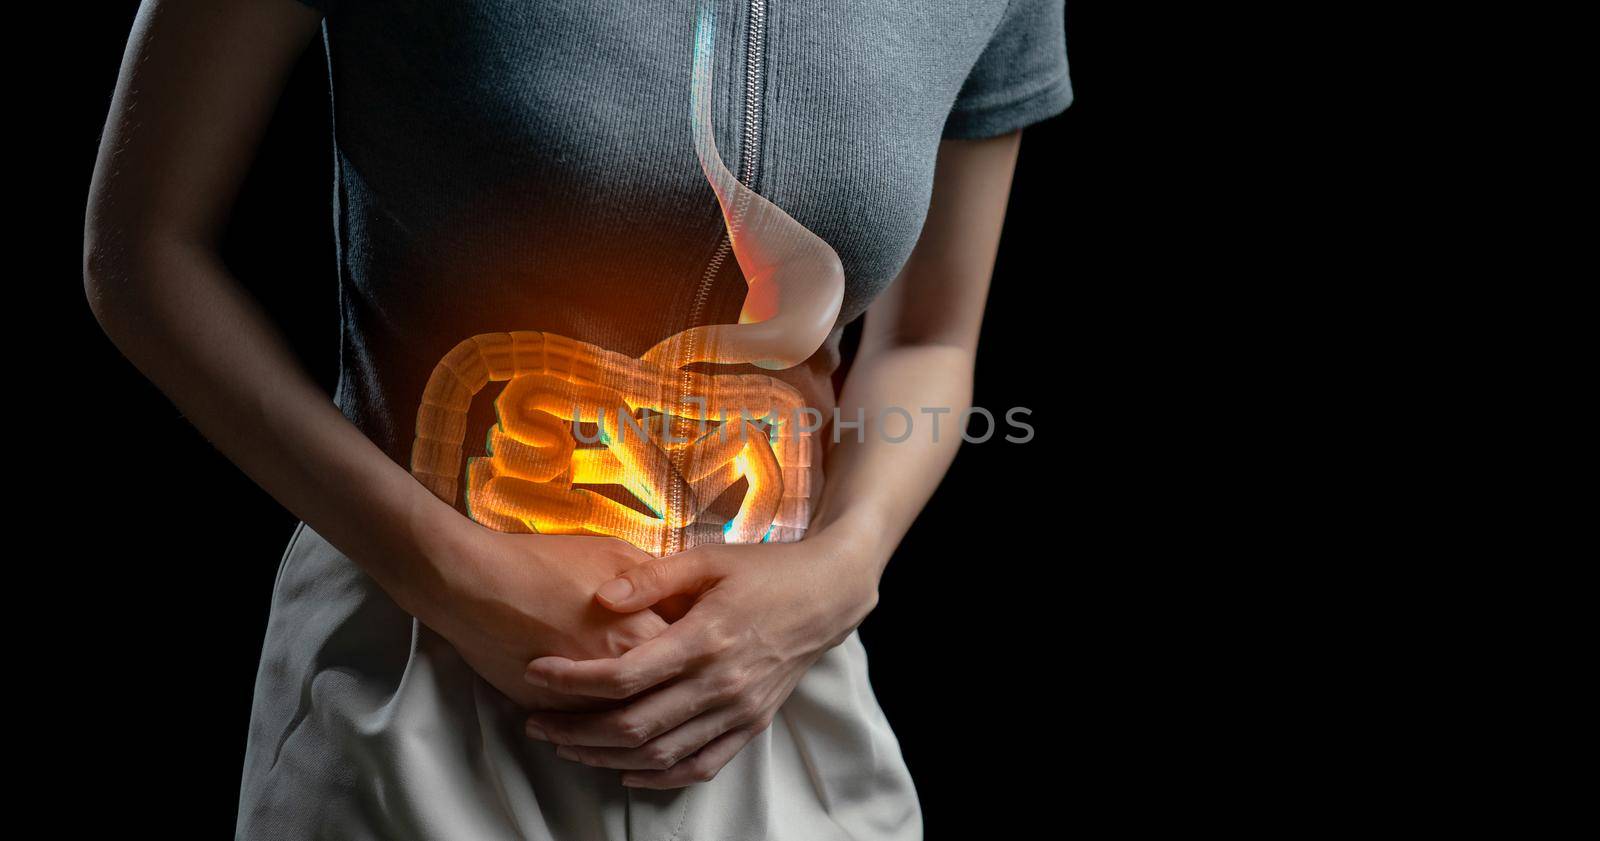 Abdominal pain woman, photo of large intestine on woman body, stomachache diarrhea symptom, menstrual period cramp or food poisoning. Health care concept. by sirawit99